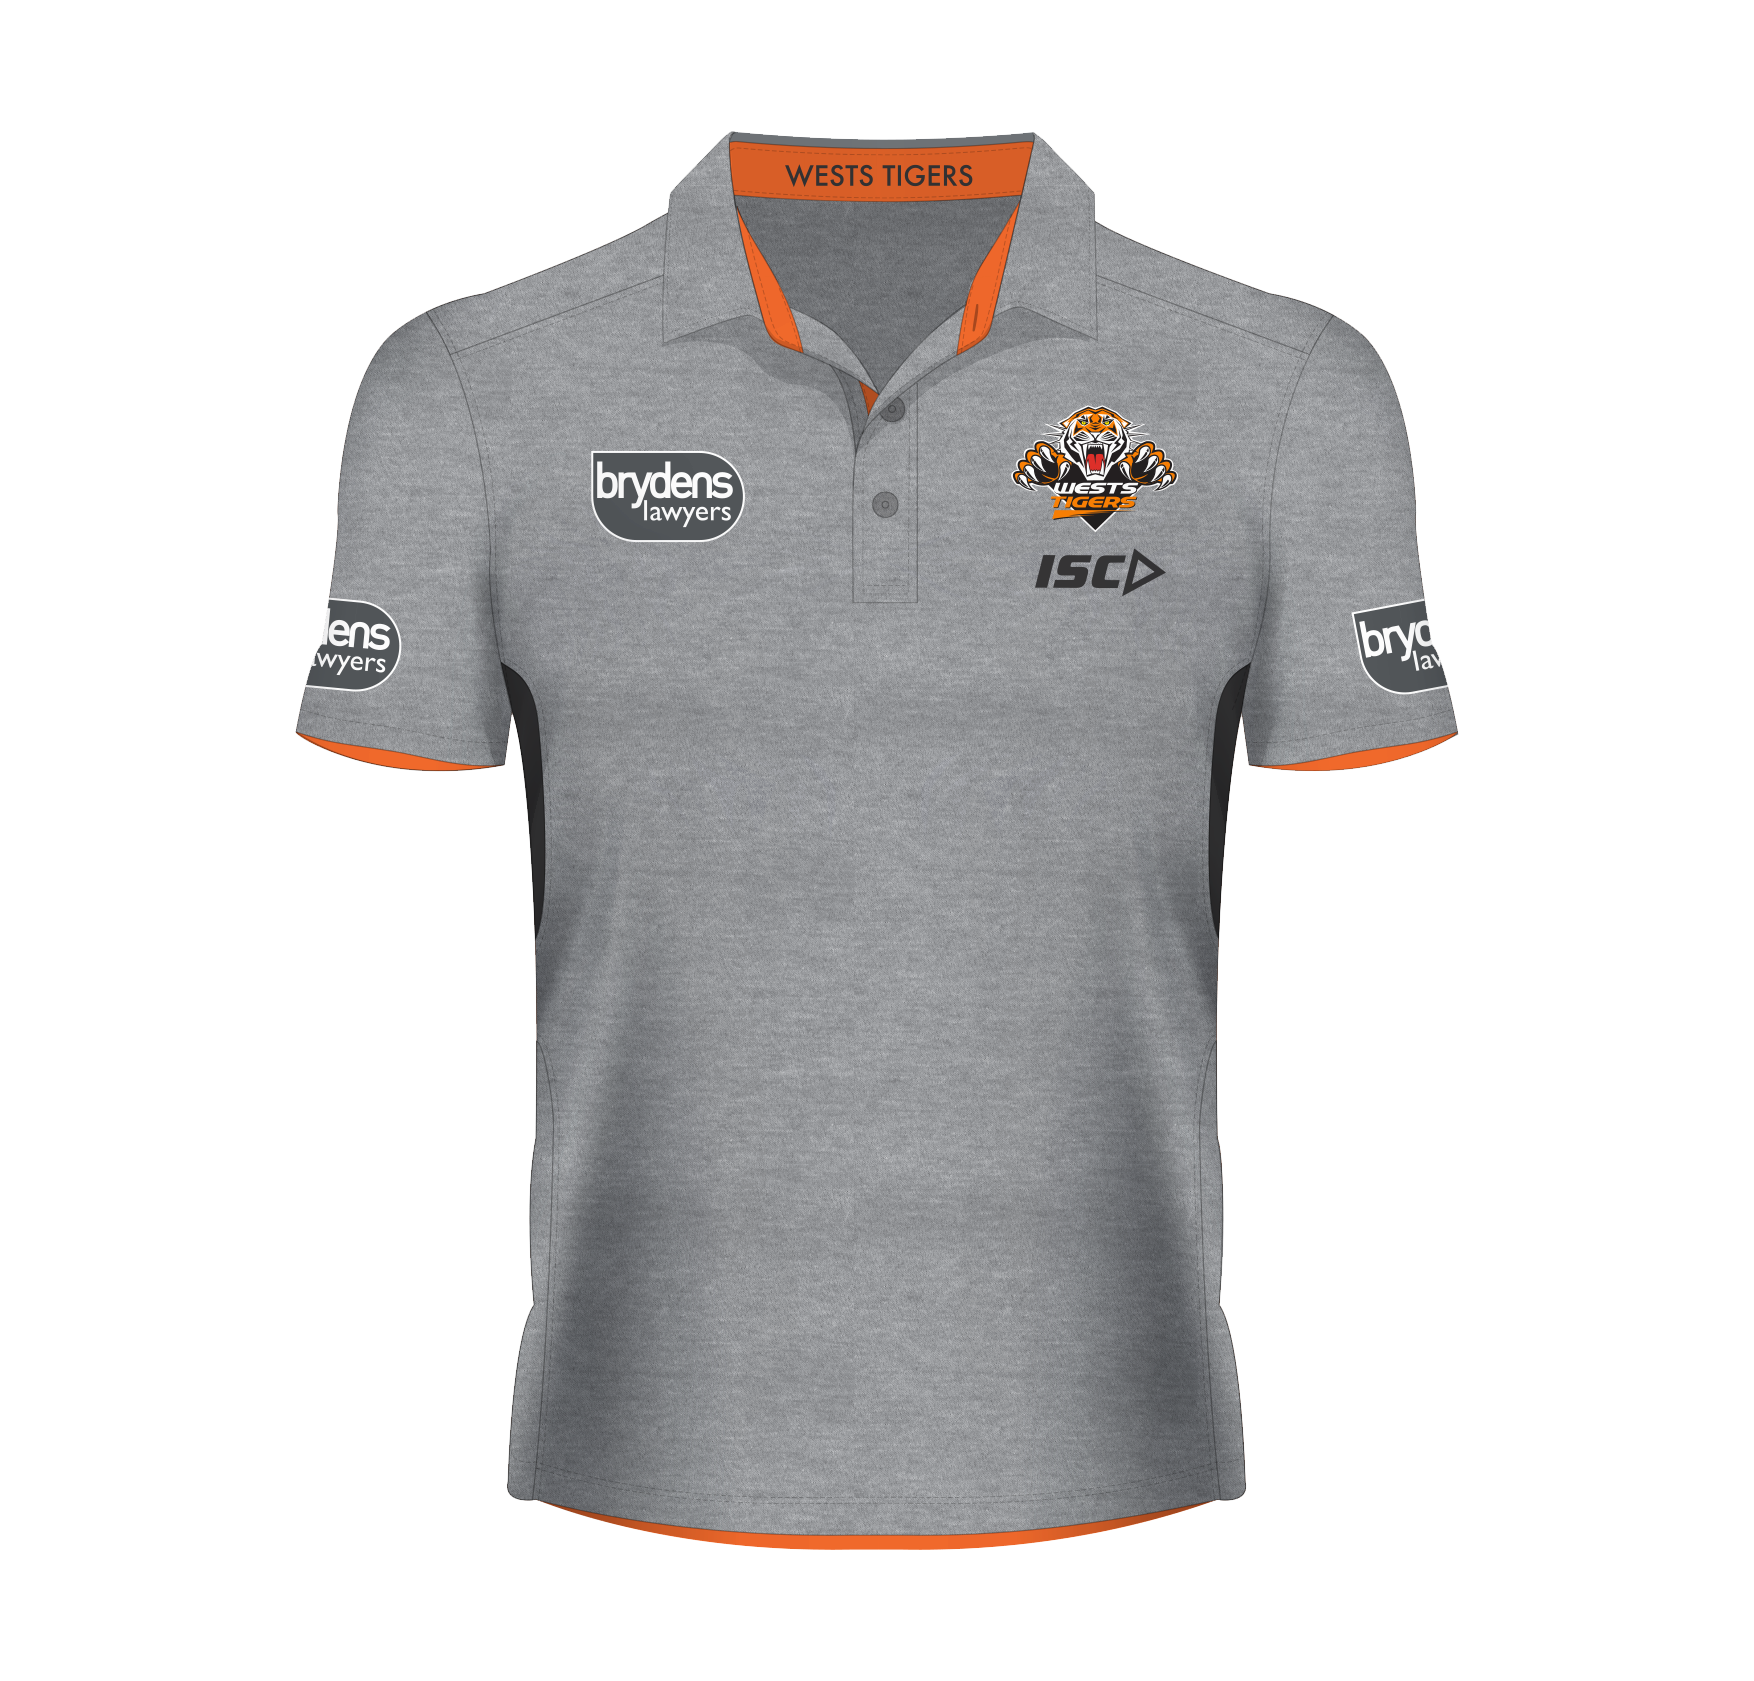 west tigers polo shirt